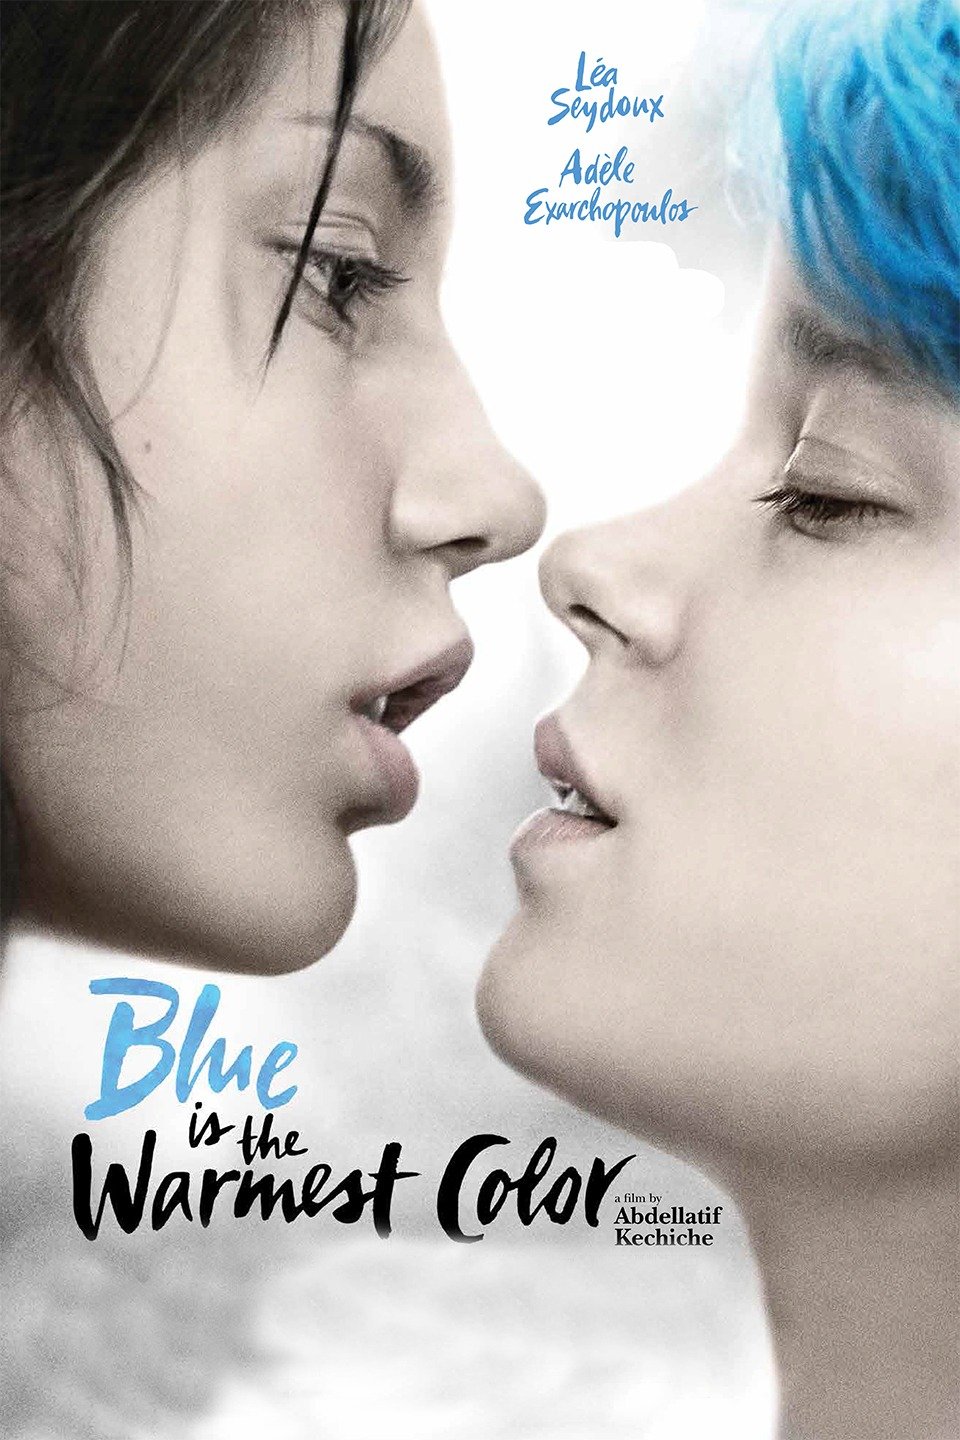 Blue Is the Warmest Color (2013) [18+]